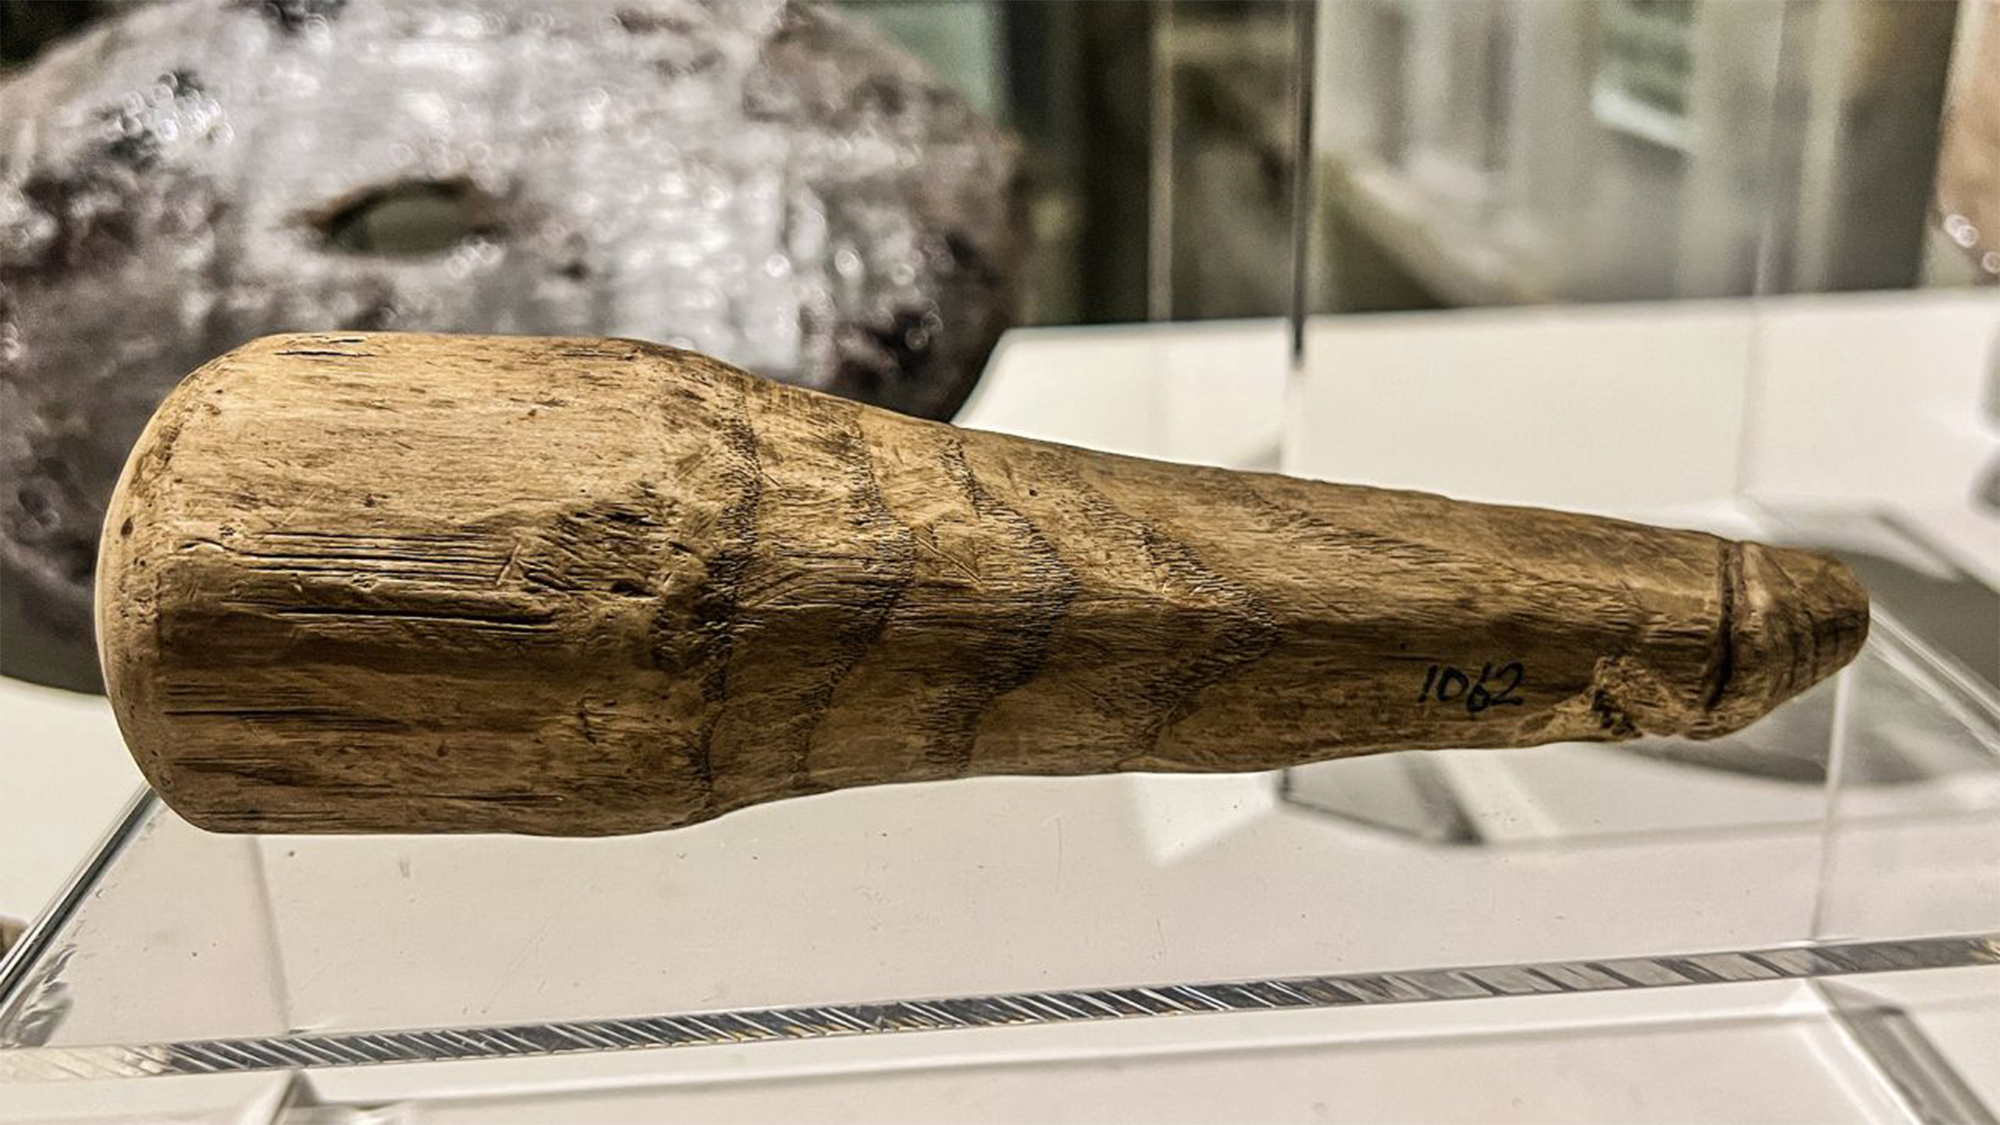 Scientists think they discovered a 2,000-year-old dildo Popular Science image